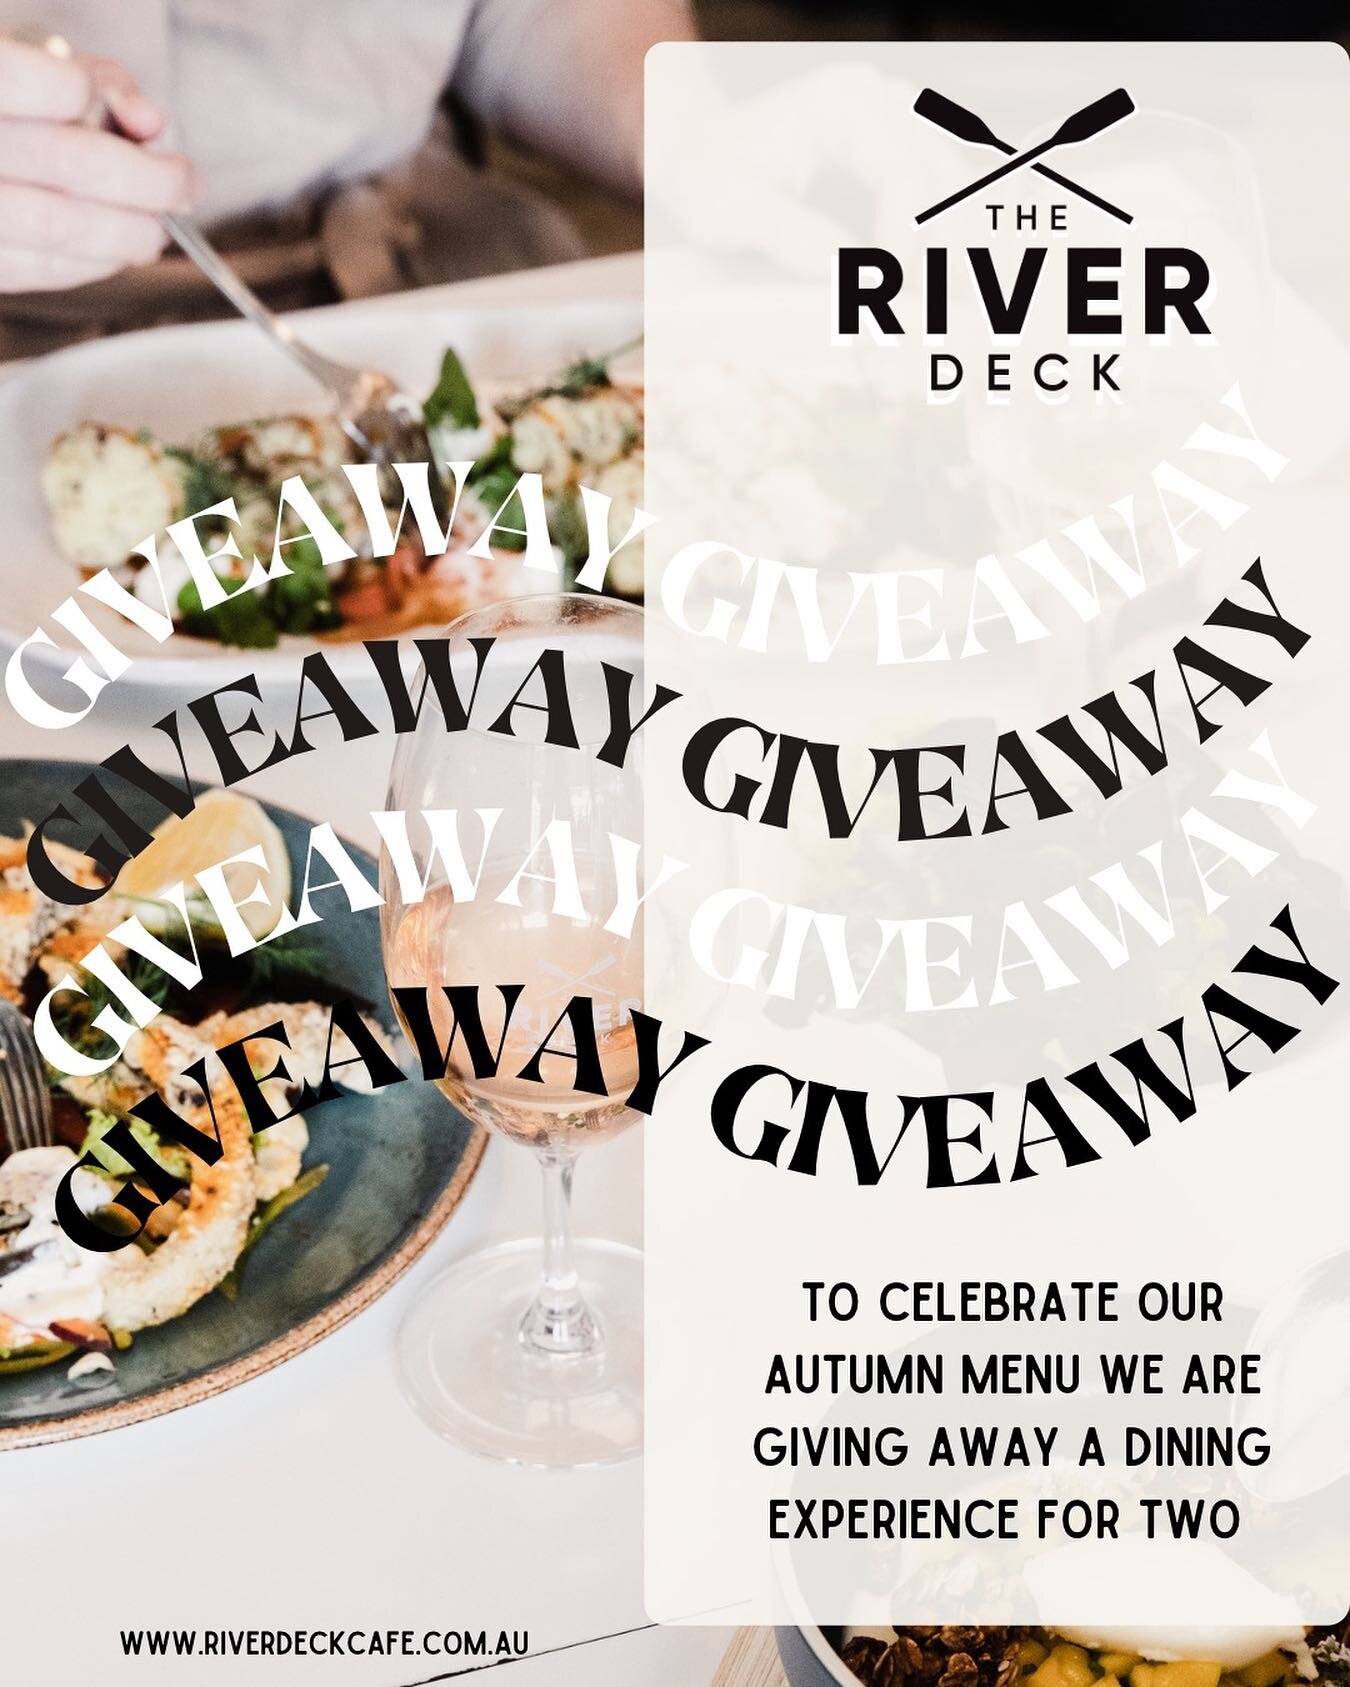 ✨GIVEAWAY ✨

We are giving away a dining experience for two to enjoy the tastes of autumn through our new menu. 

Prize:
Your choice of breakfast or lunch with your selection of beverages. 

Follow the instructions below for your chance to win:
🌟 LI